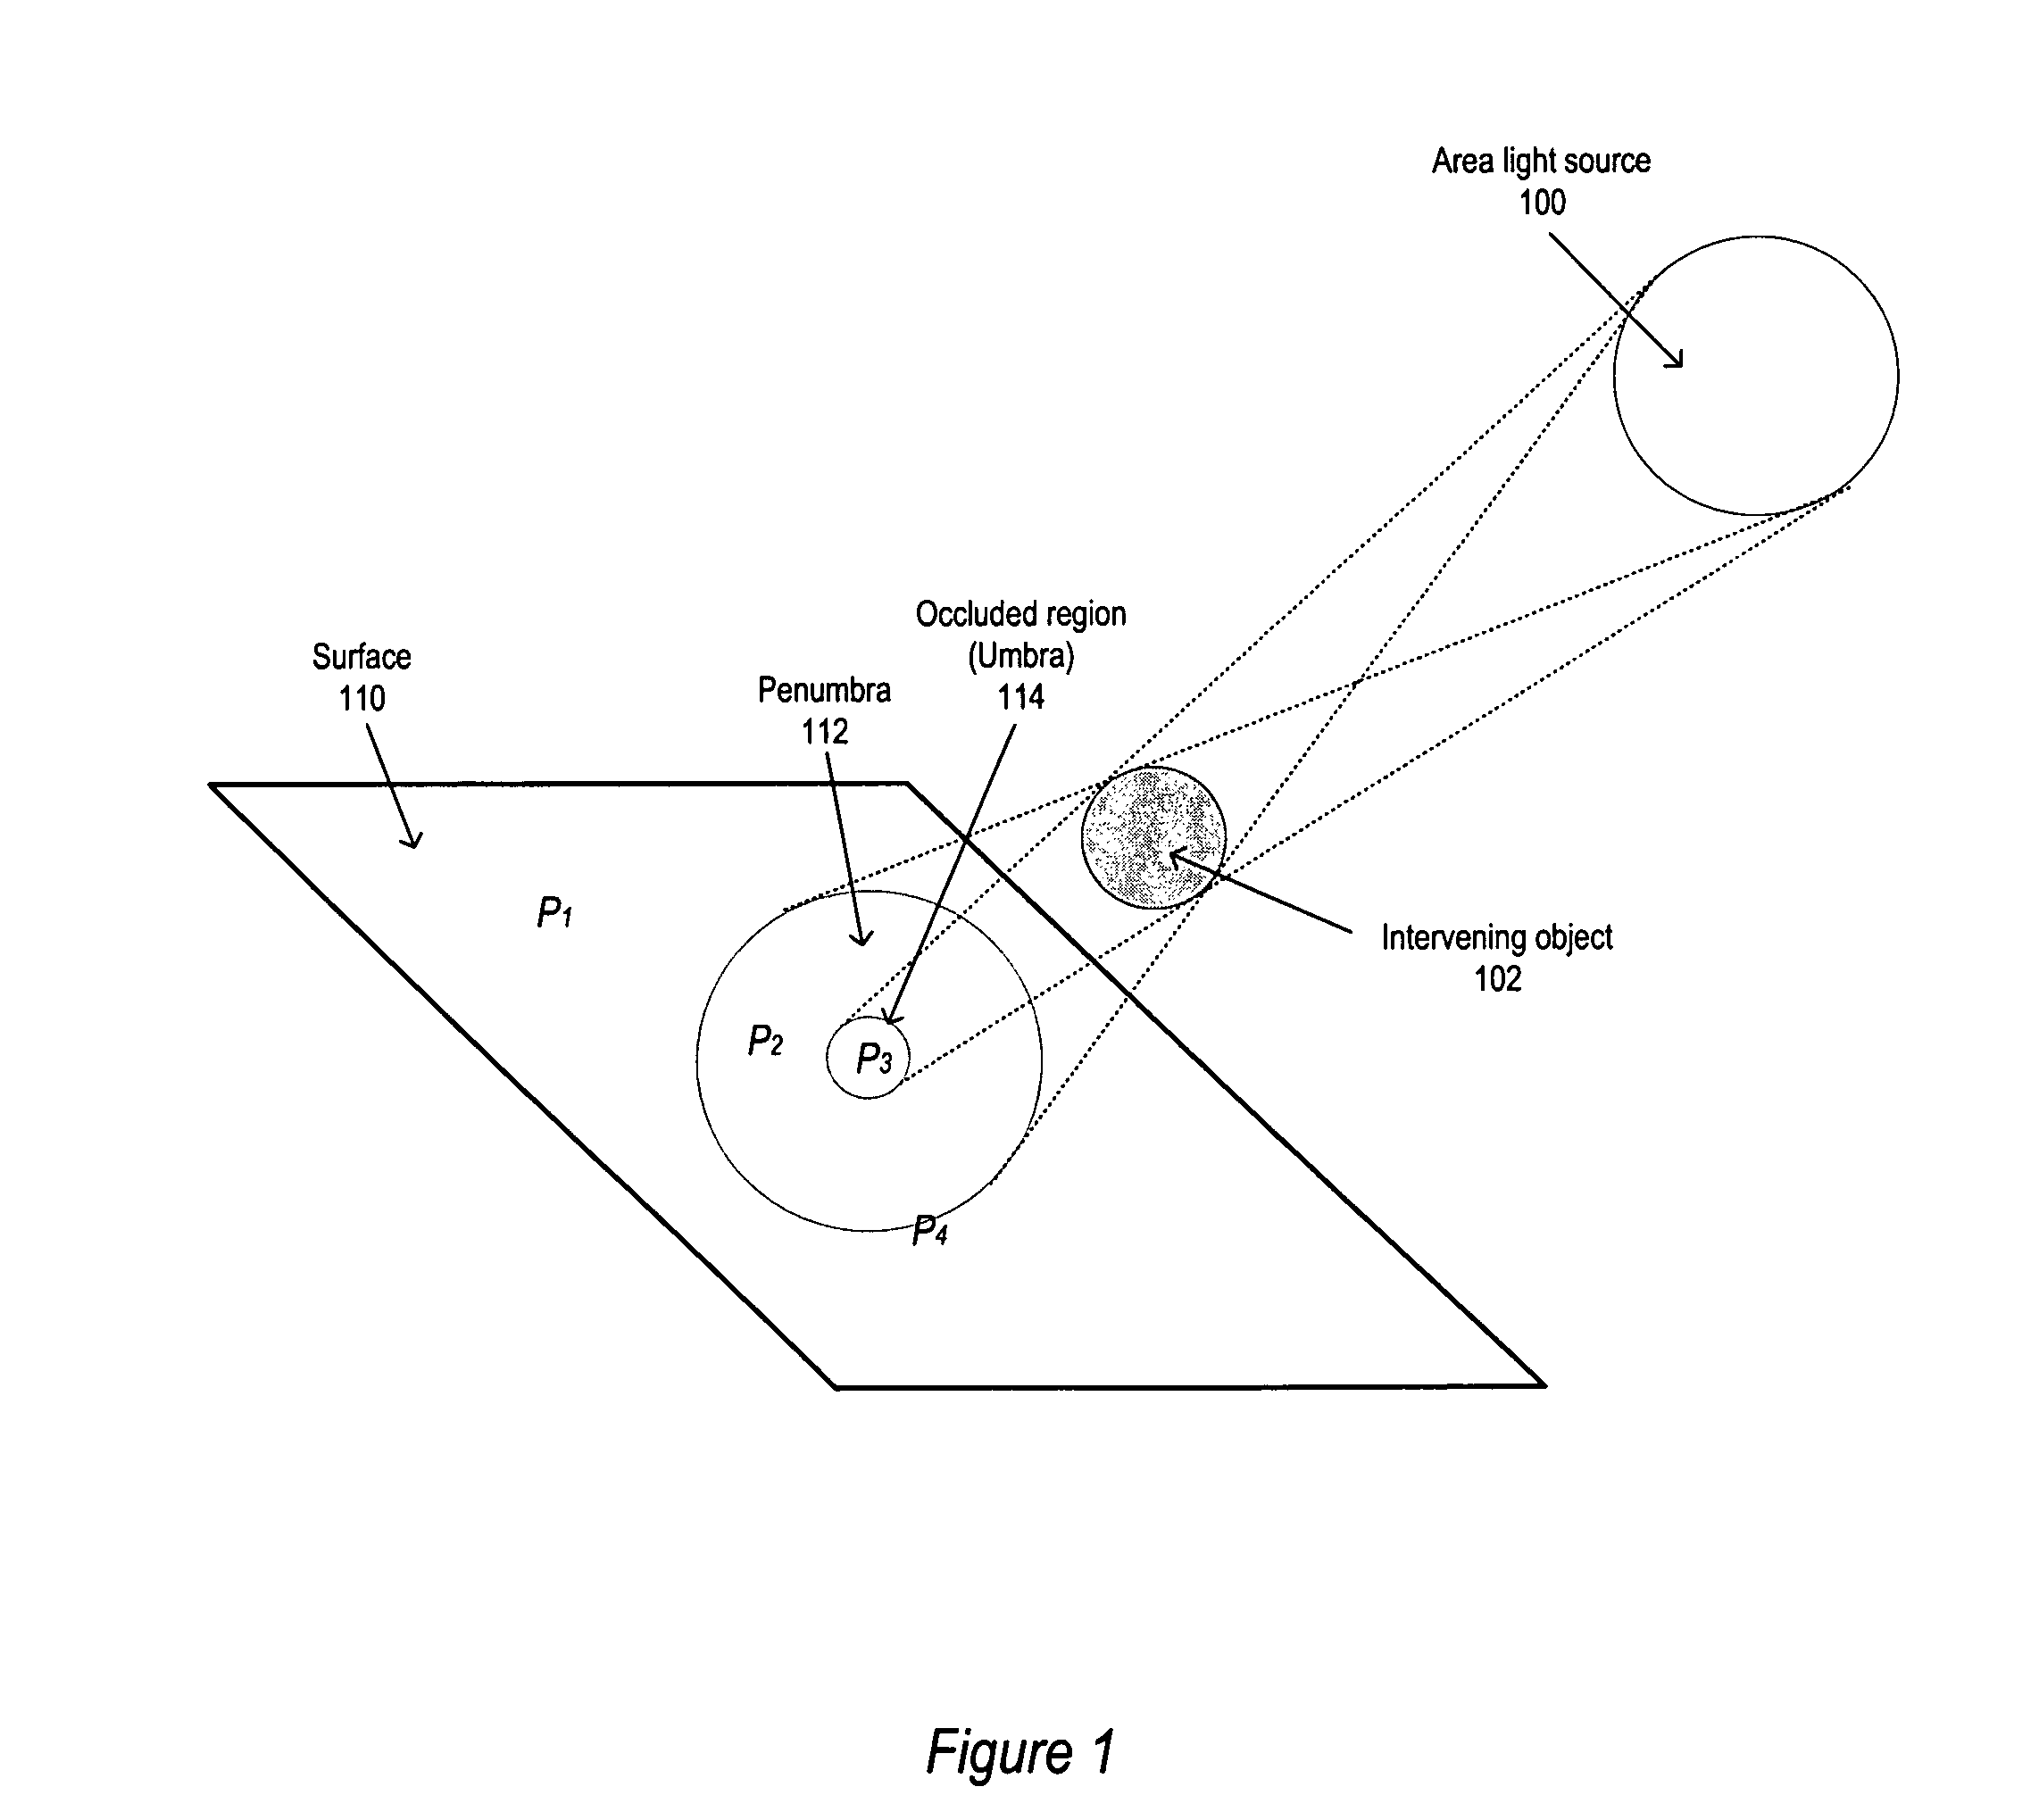 Method and apparatus for computing indirect lighting for global illumination rendering in 3-D computer graphics